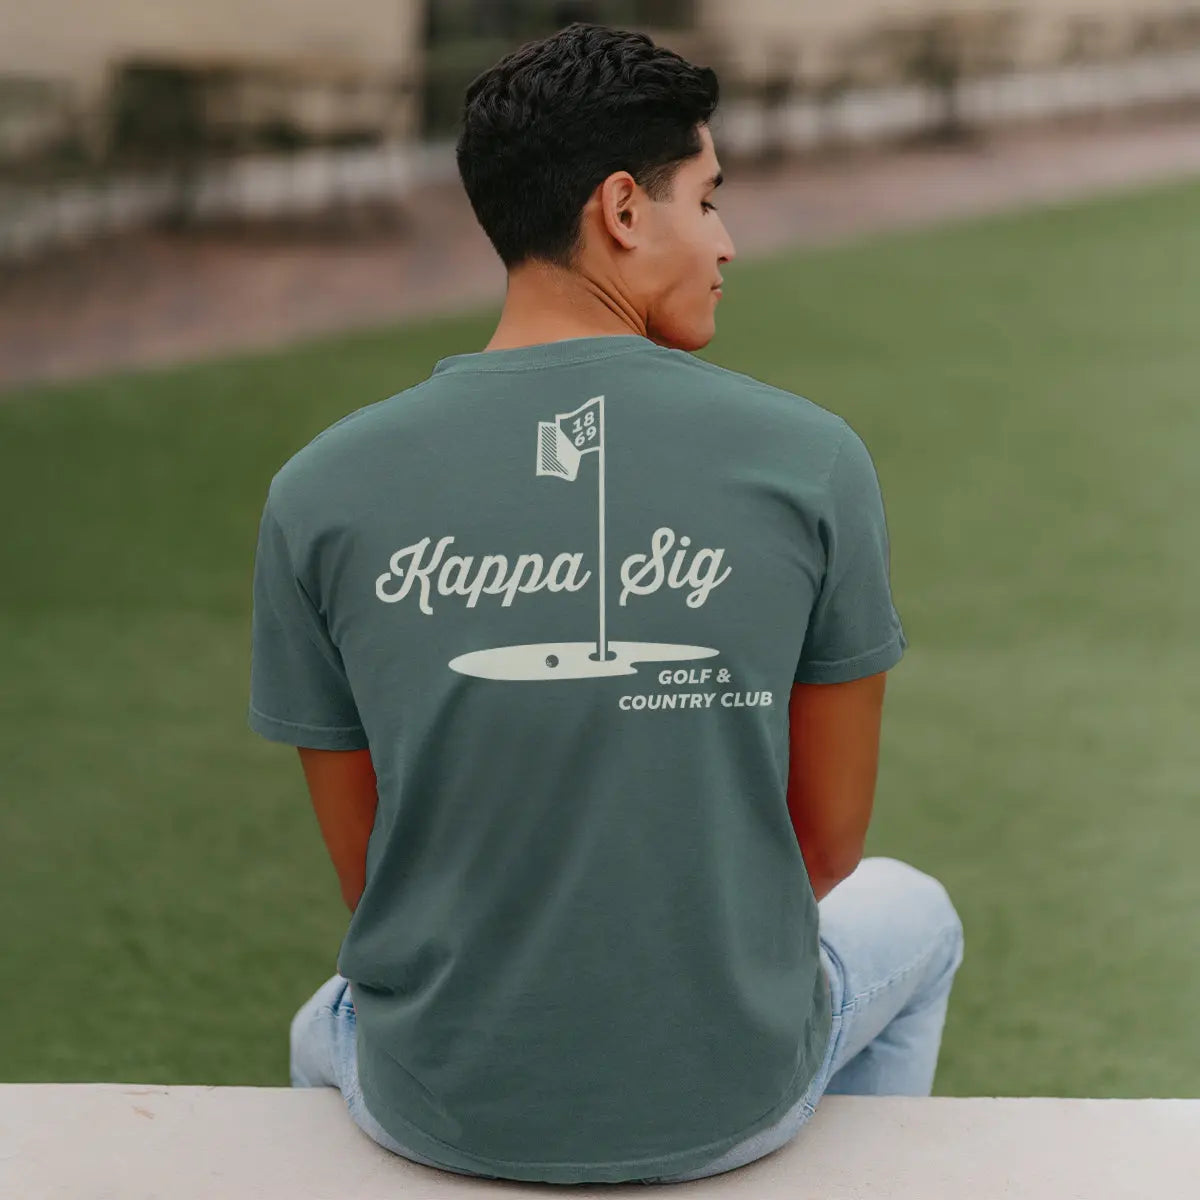 New! Kappa Sig Comfort Colors Par For The Course Short Sleeve Tee - Kappa Sigma Official Store